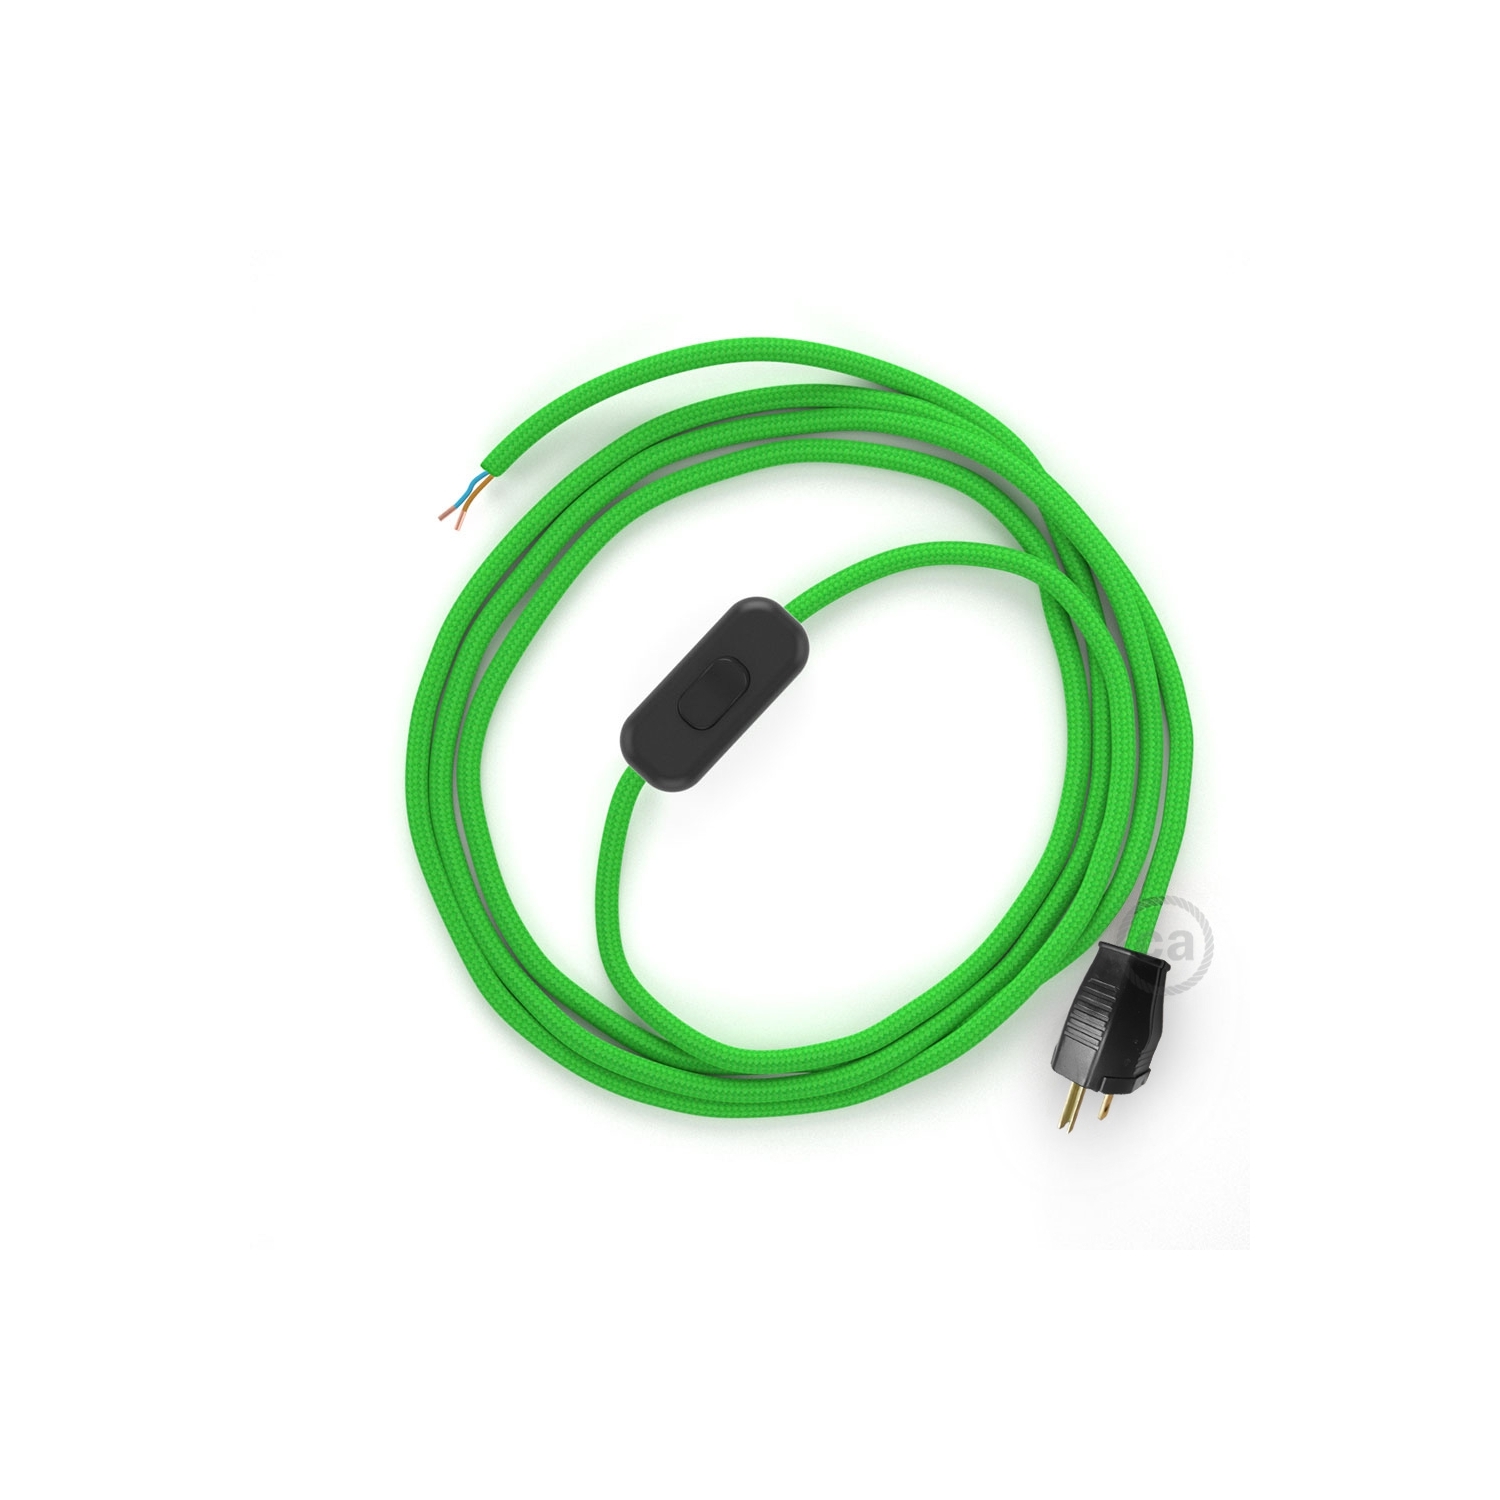 Power Cord with in-line switch, RM18 Lime Green Rayon - Choose color of switch/plug